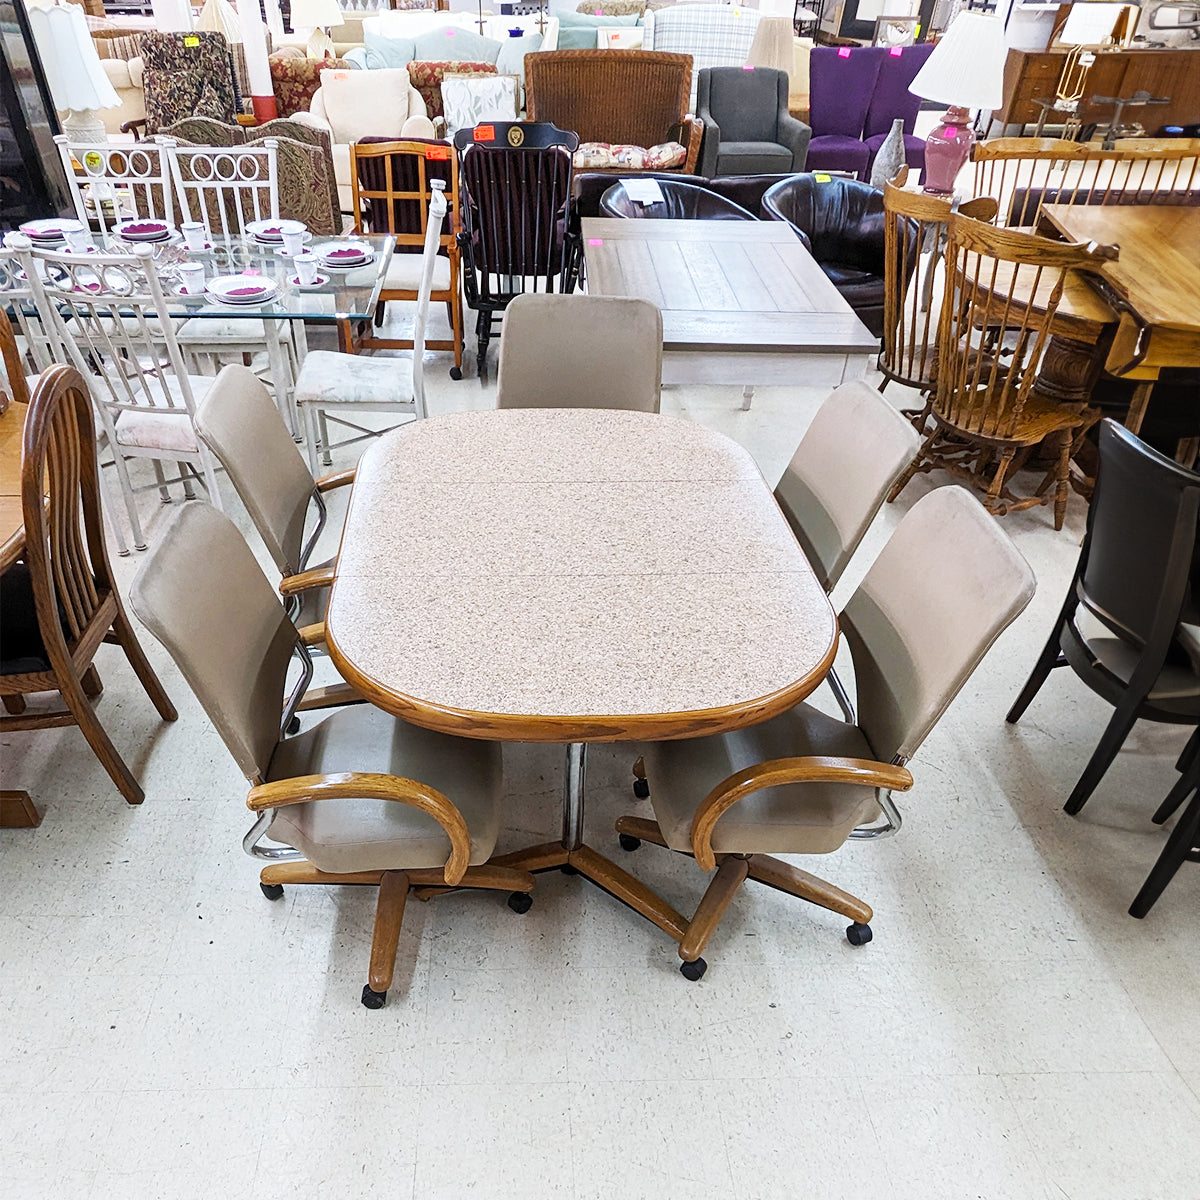 Vintage Gaming Table + 5 Chairs on Castors - Habroc - Online ReStore